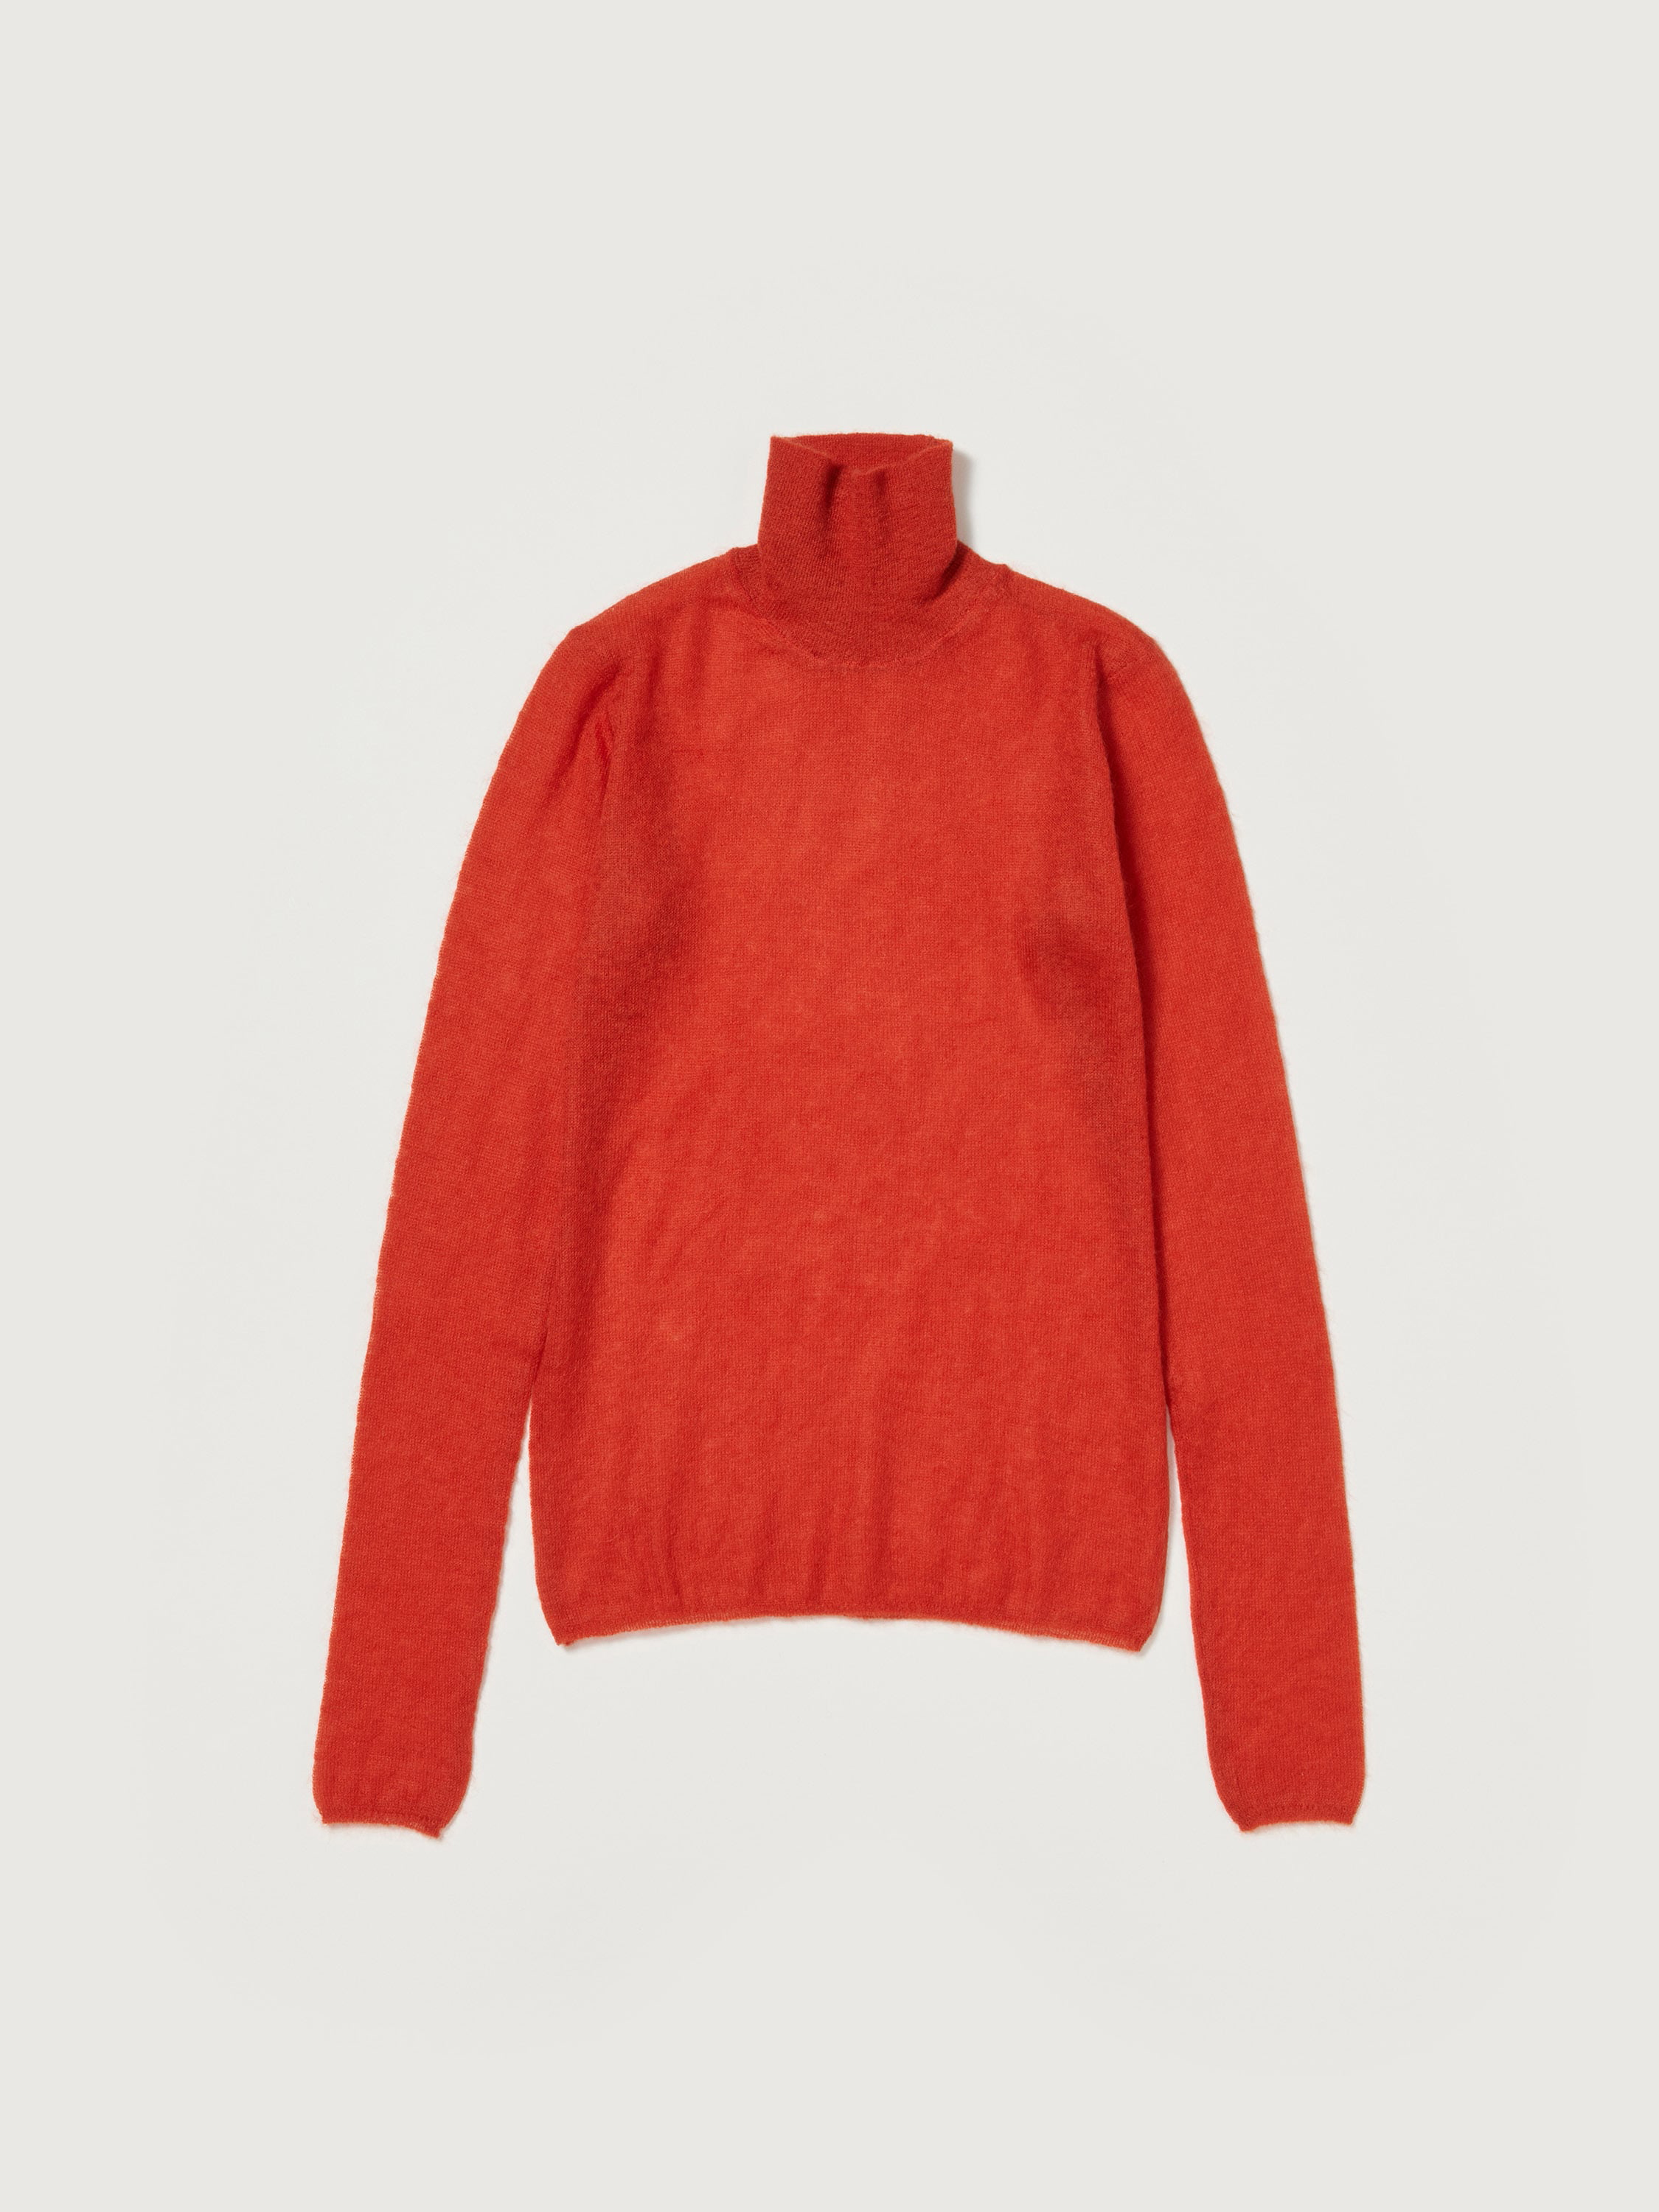 KID MOHAIR SHEER KNIT TURTLE 詳細画像 RED 4